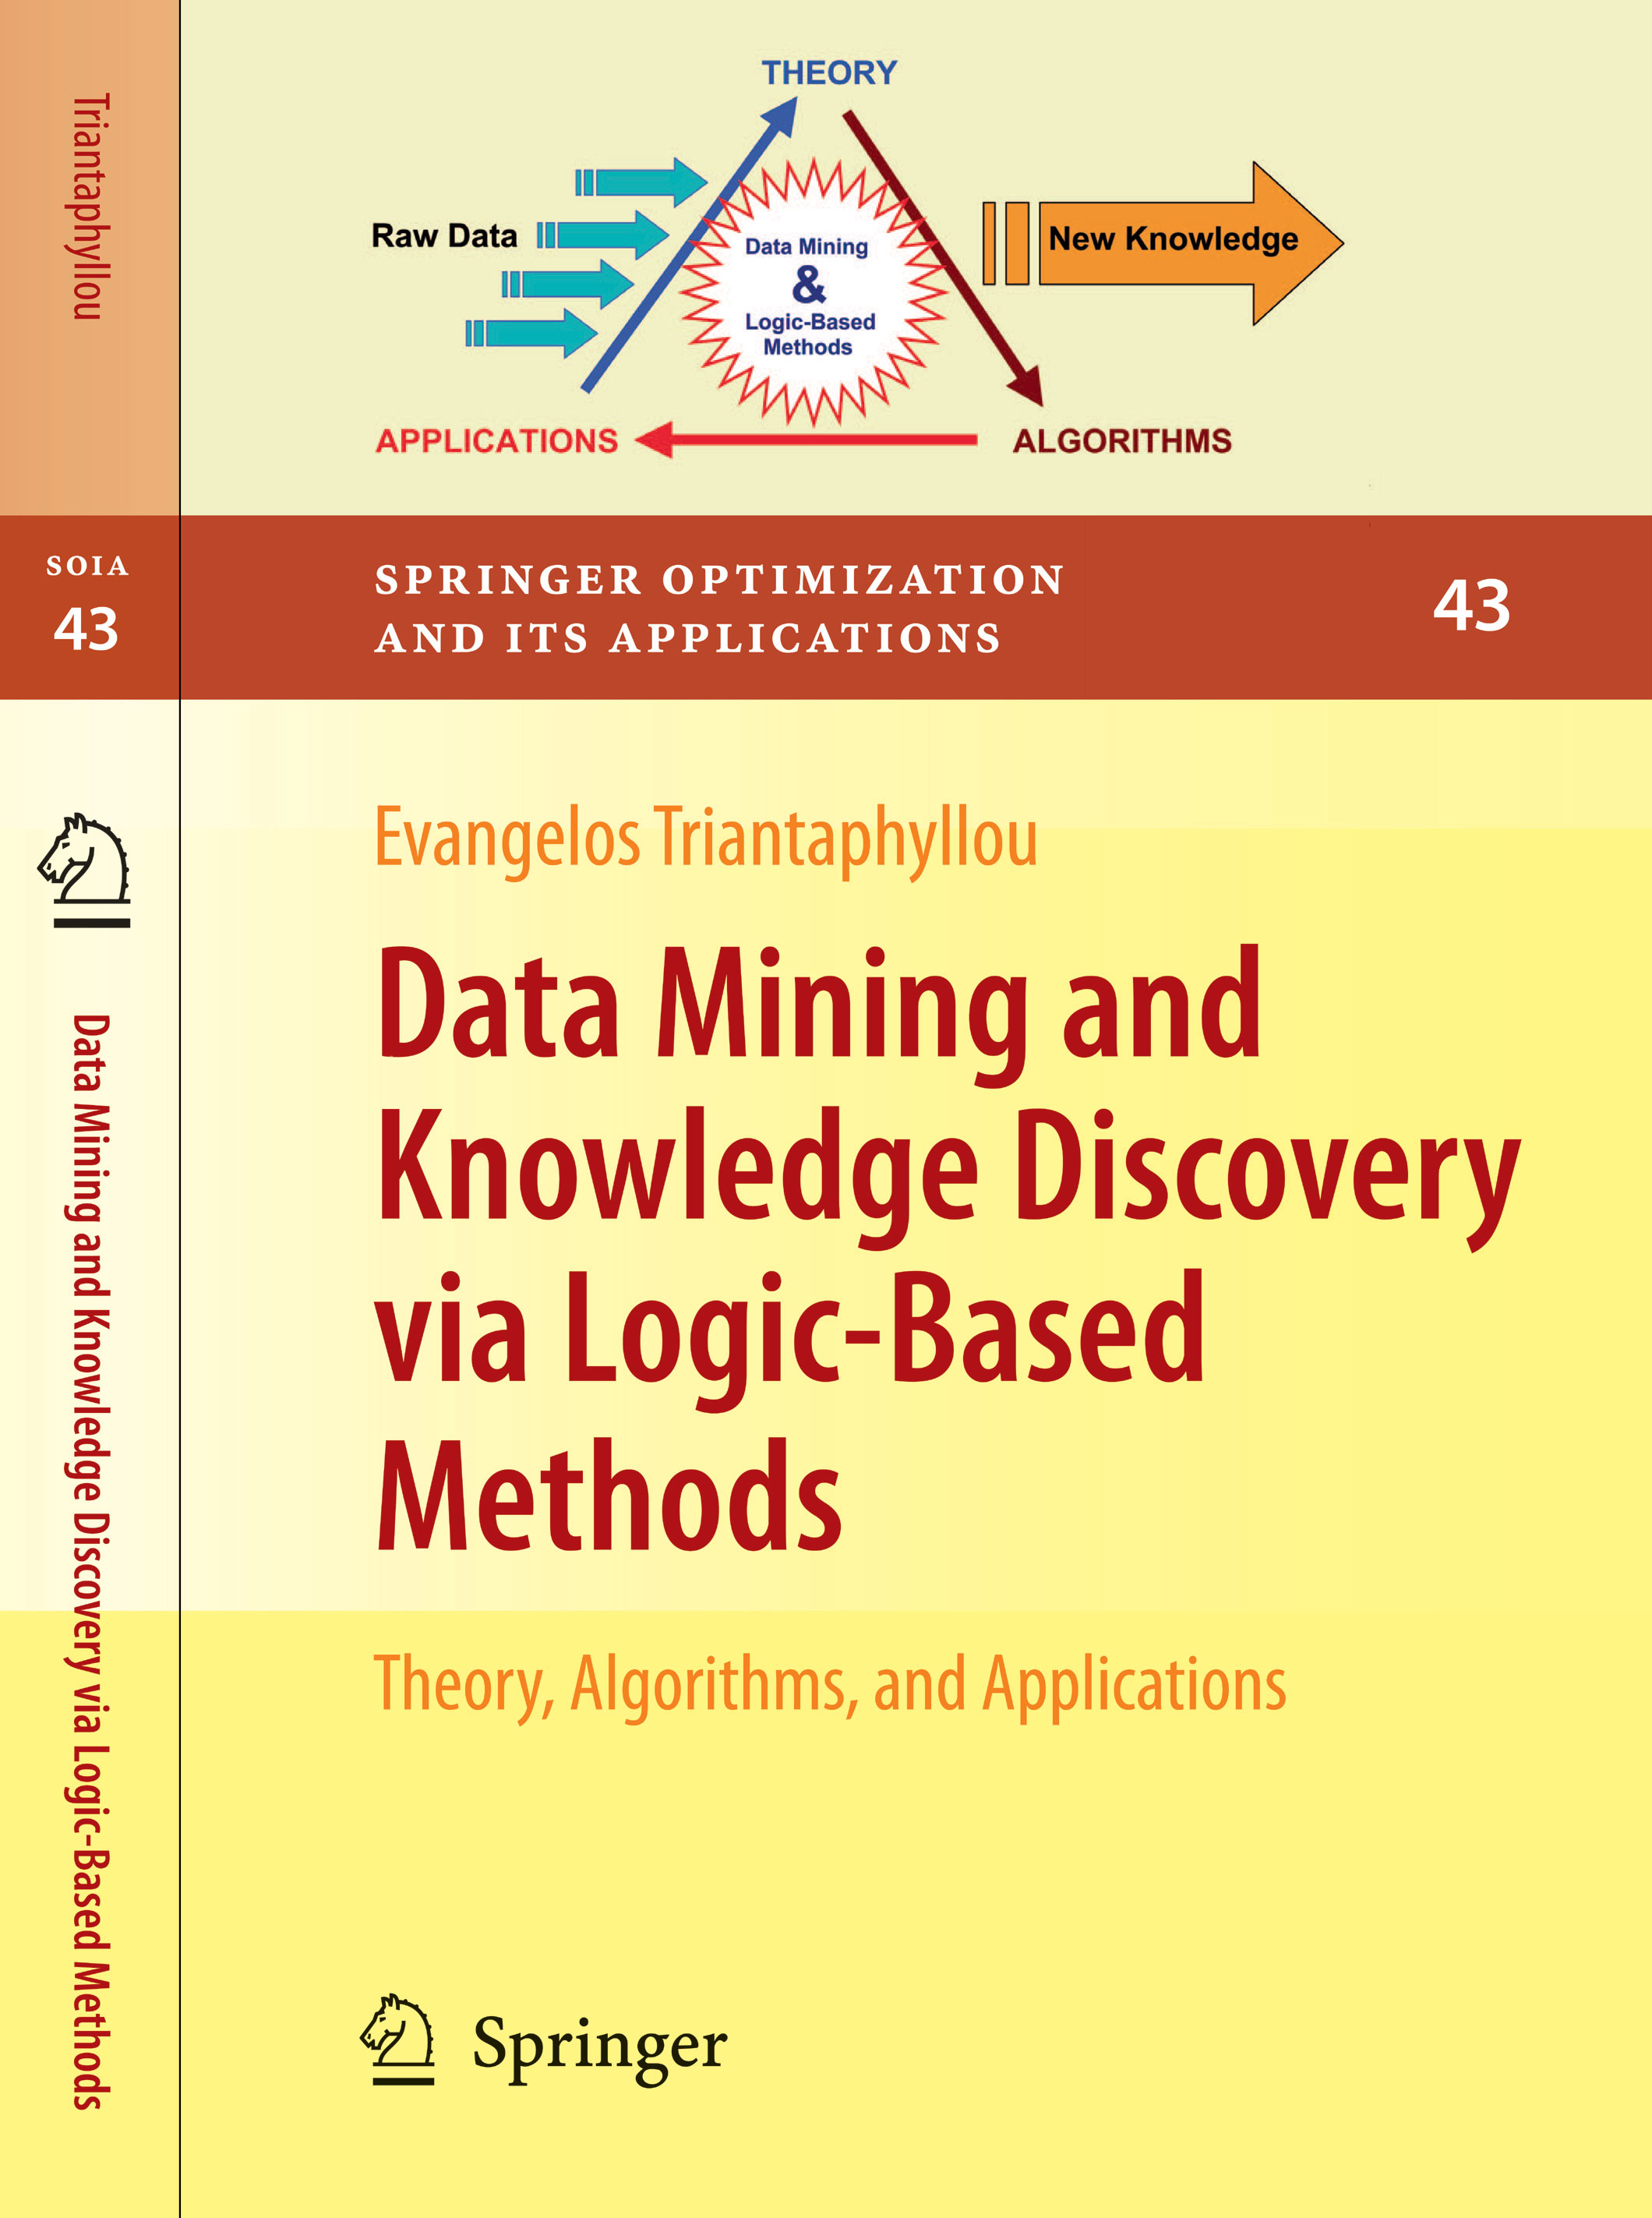 A Unique Book on Data Mining and Mathematical Logic.